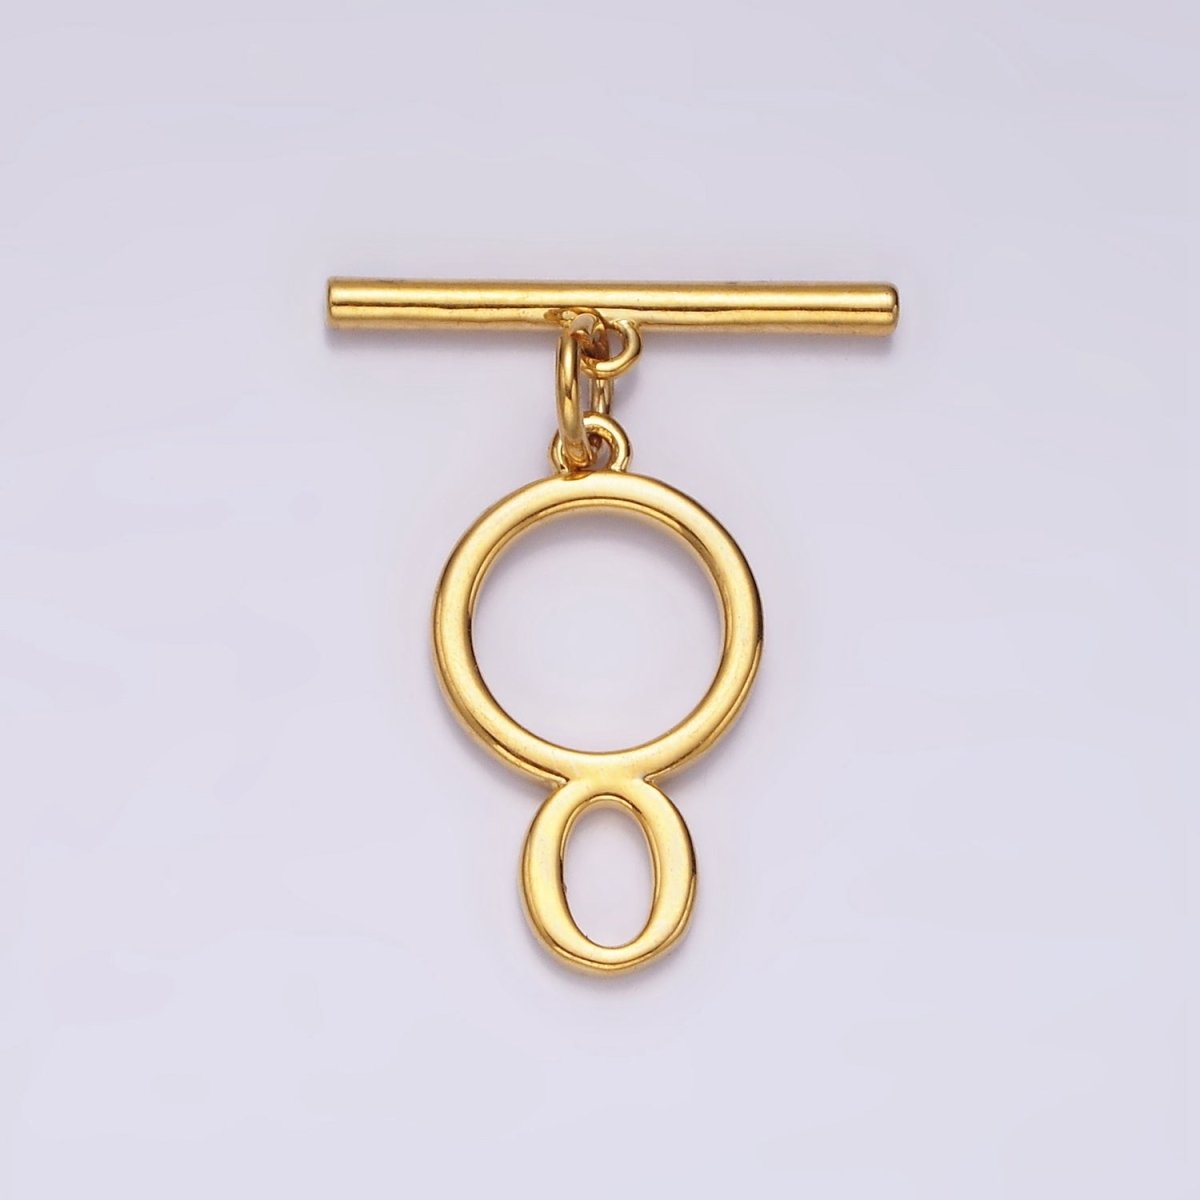 14K Gold Filled A-Z Initial Letter Toggle Clasps Closure Personalized Jewelry Making Findings Supply OT Clasp | A1325 - A1350 - DLUXCA